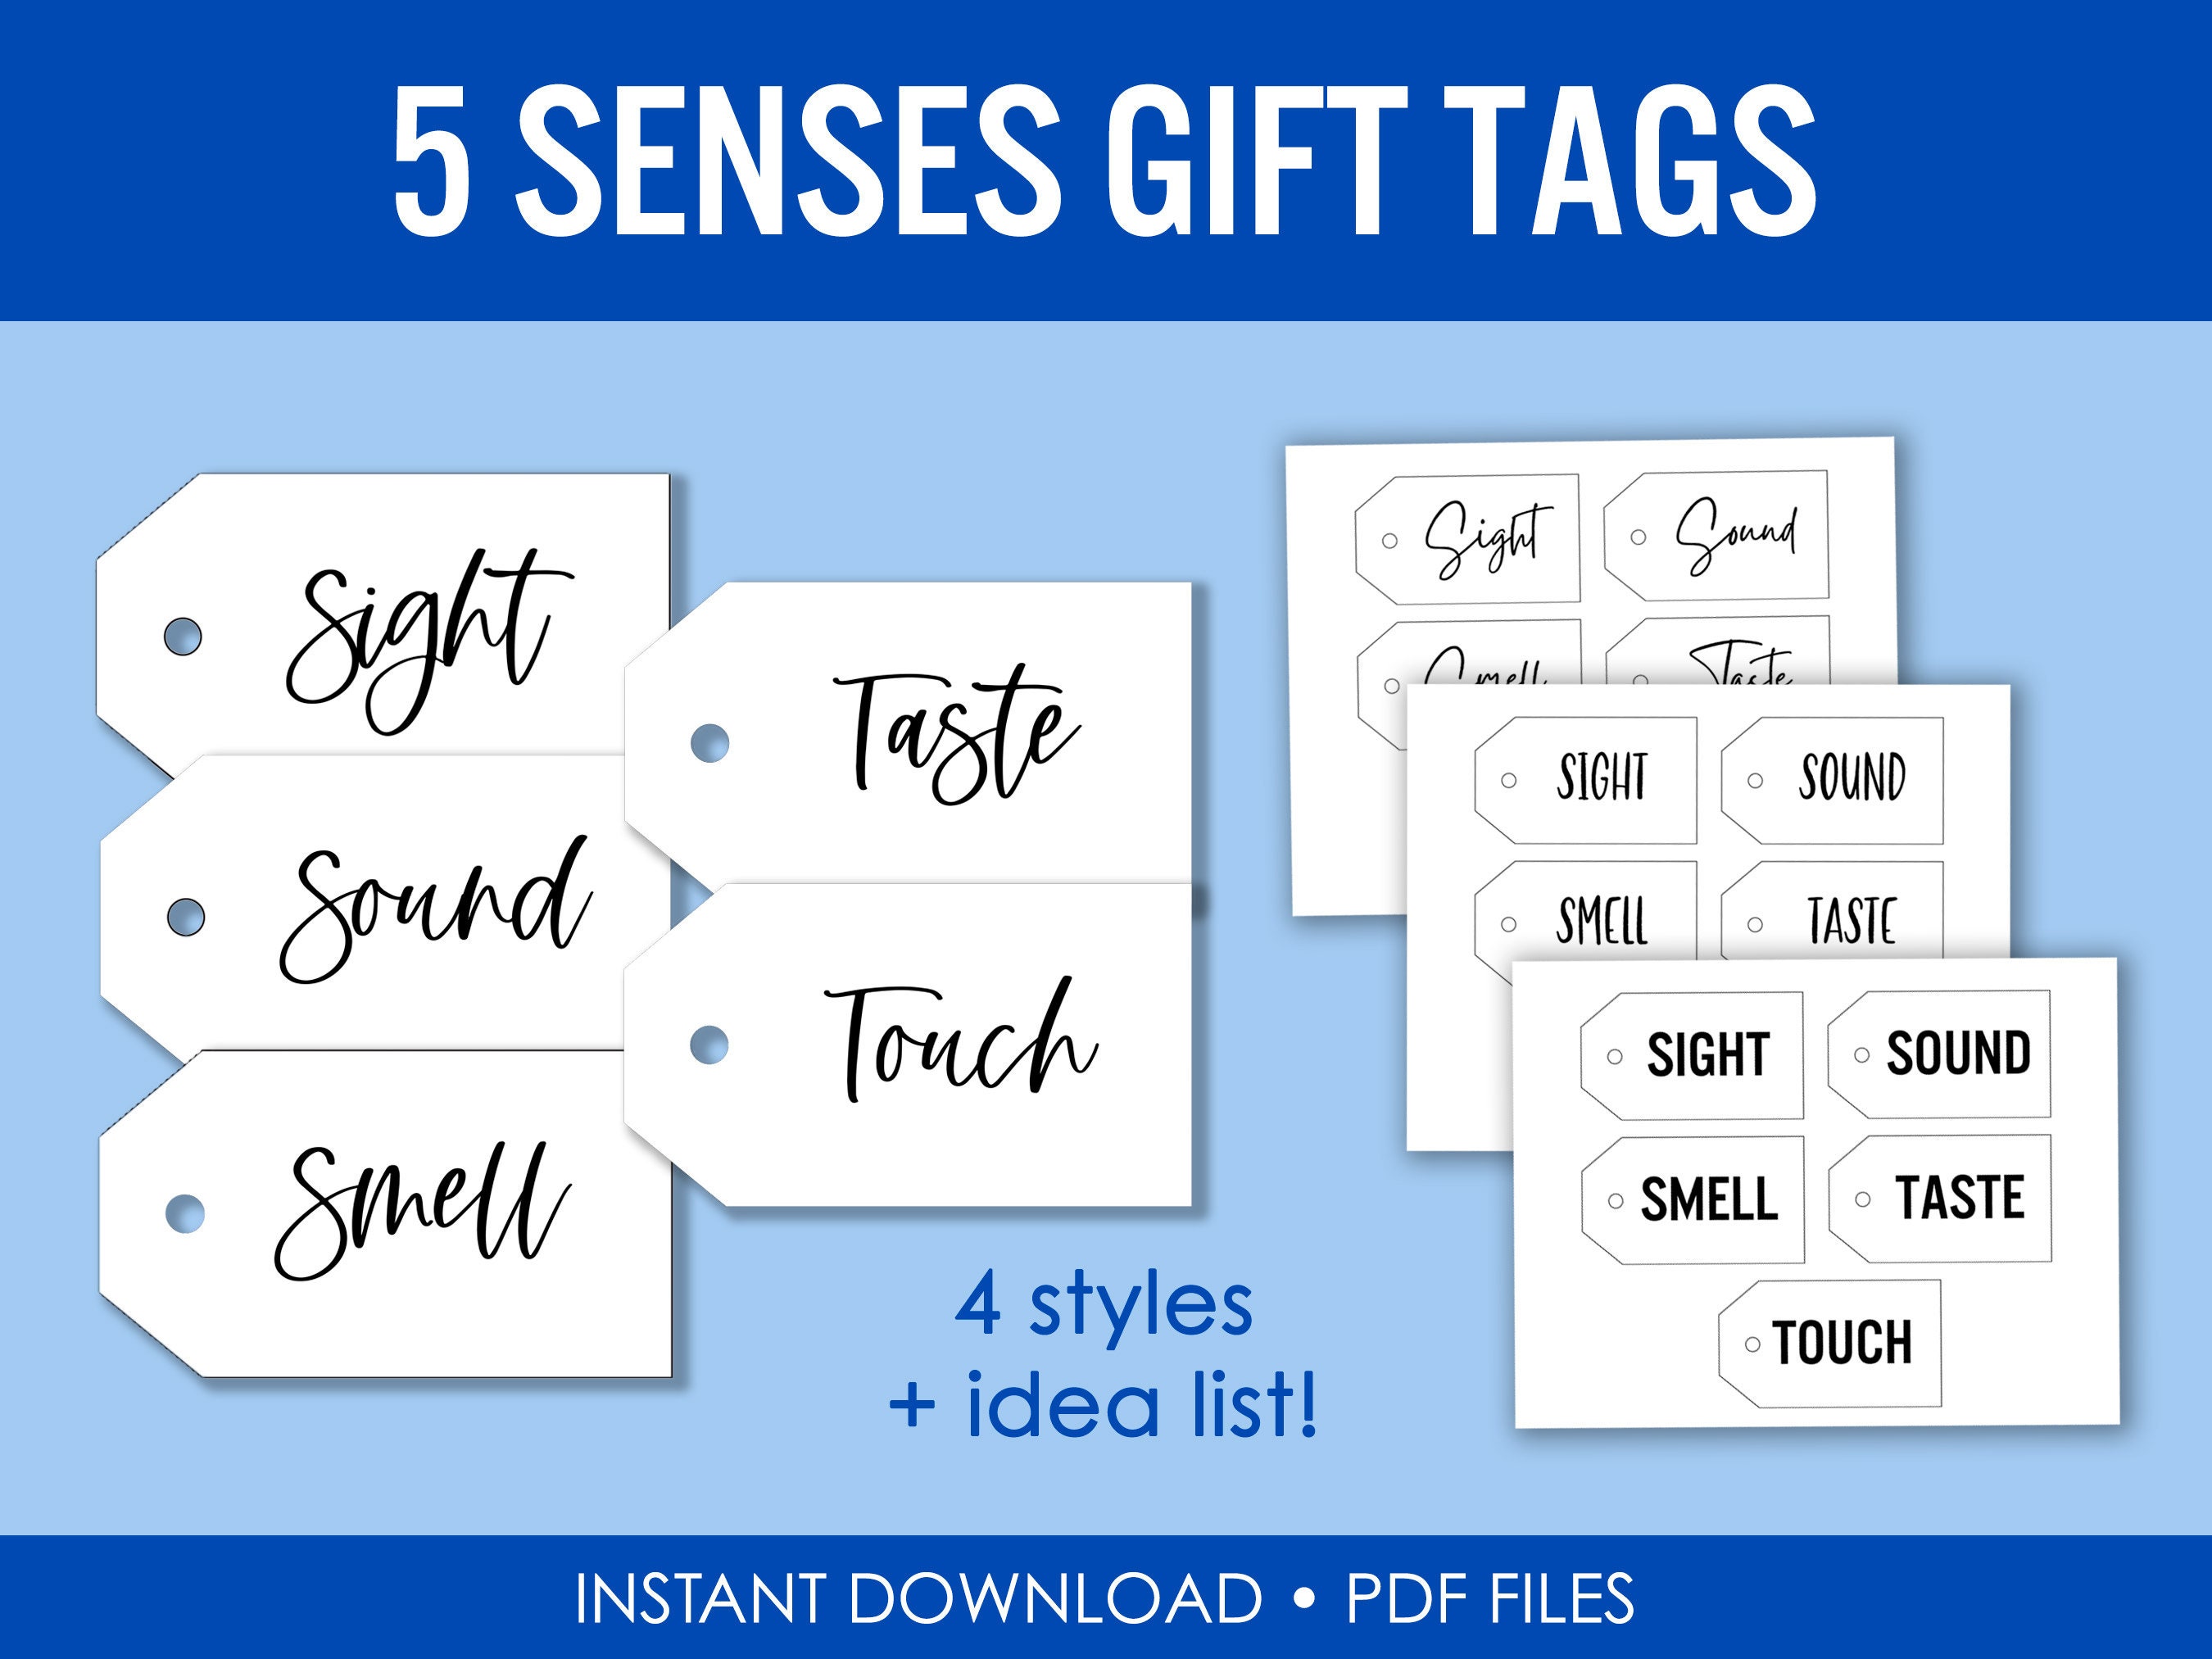 5 Senses gift giving. Thought this was a cute idea to celebrate our da, 5 Senses Gift